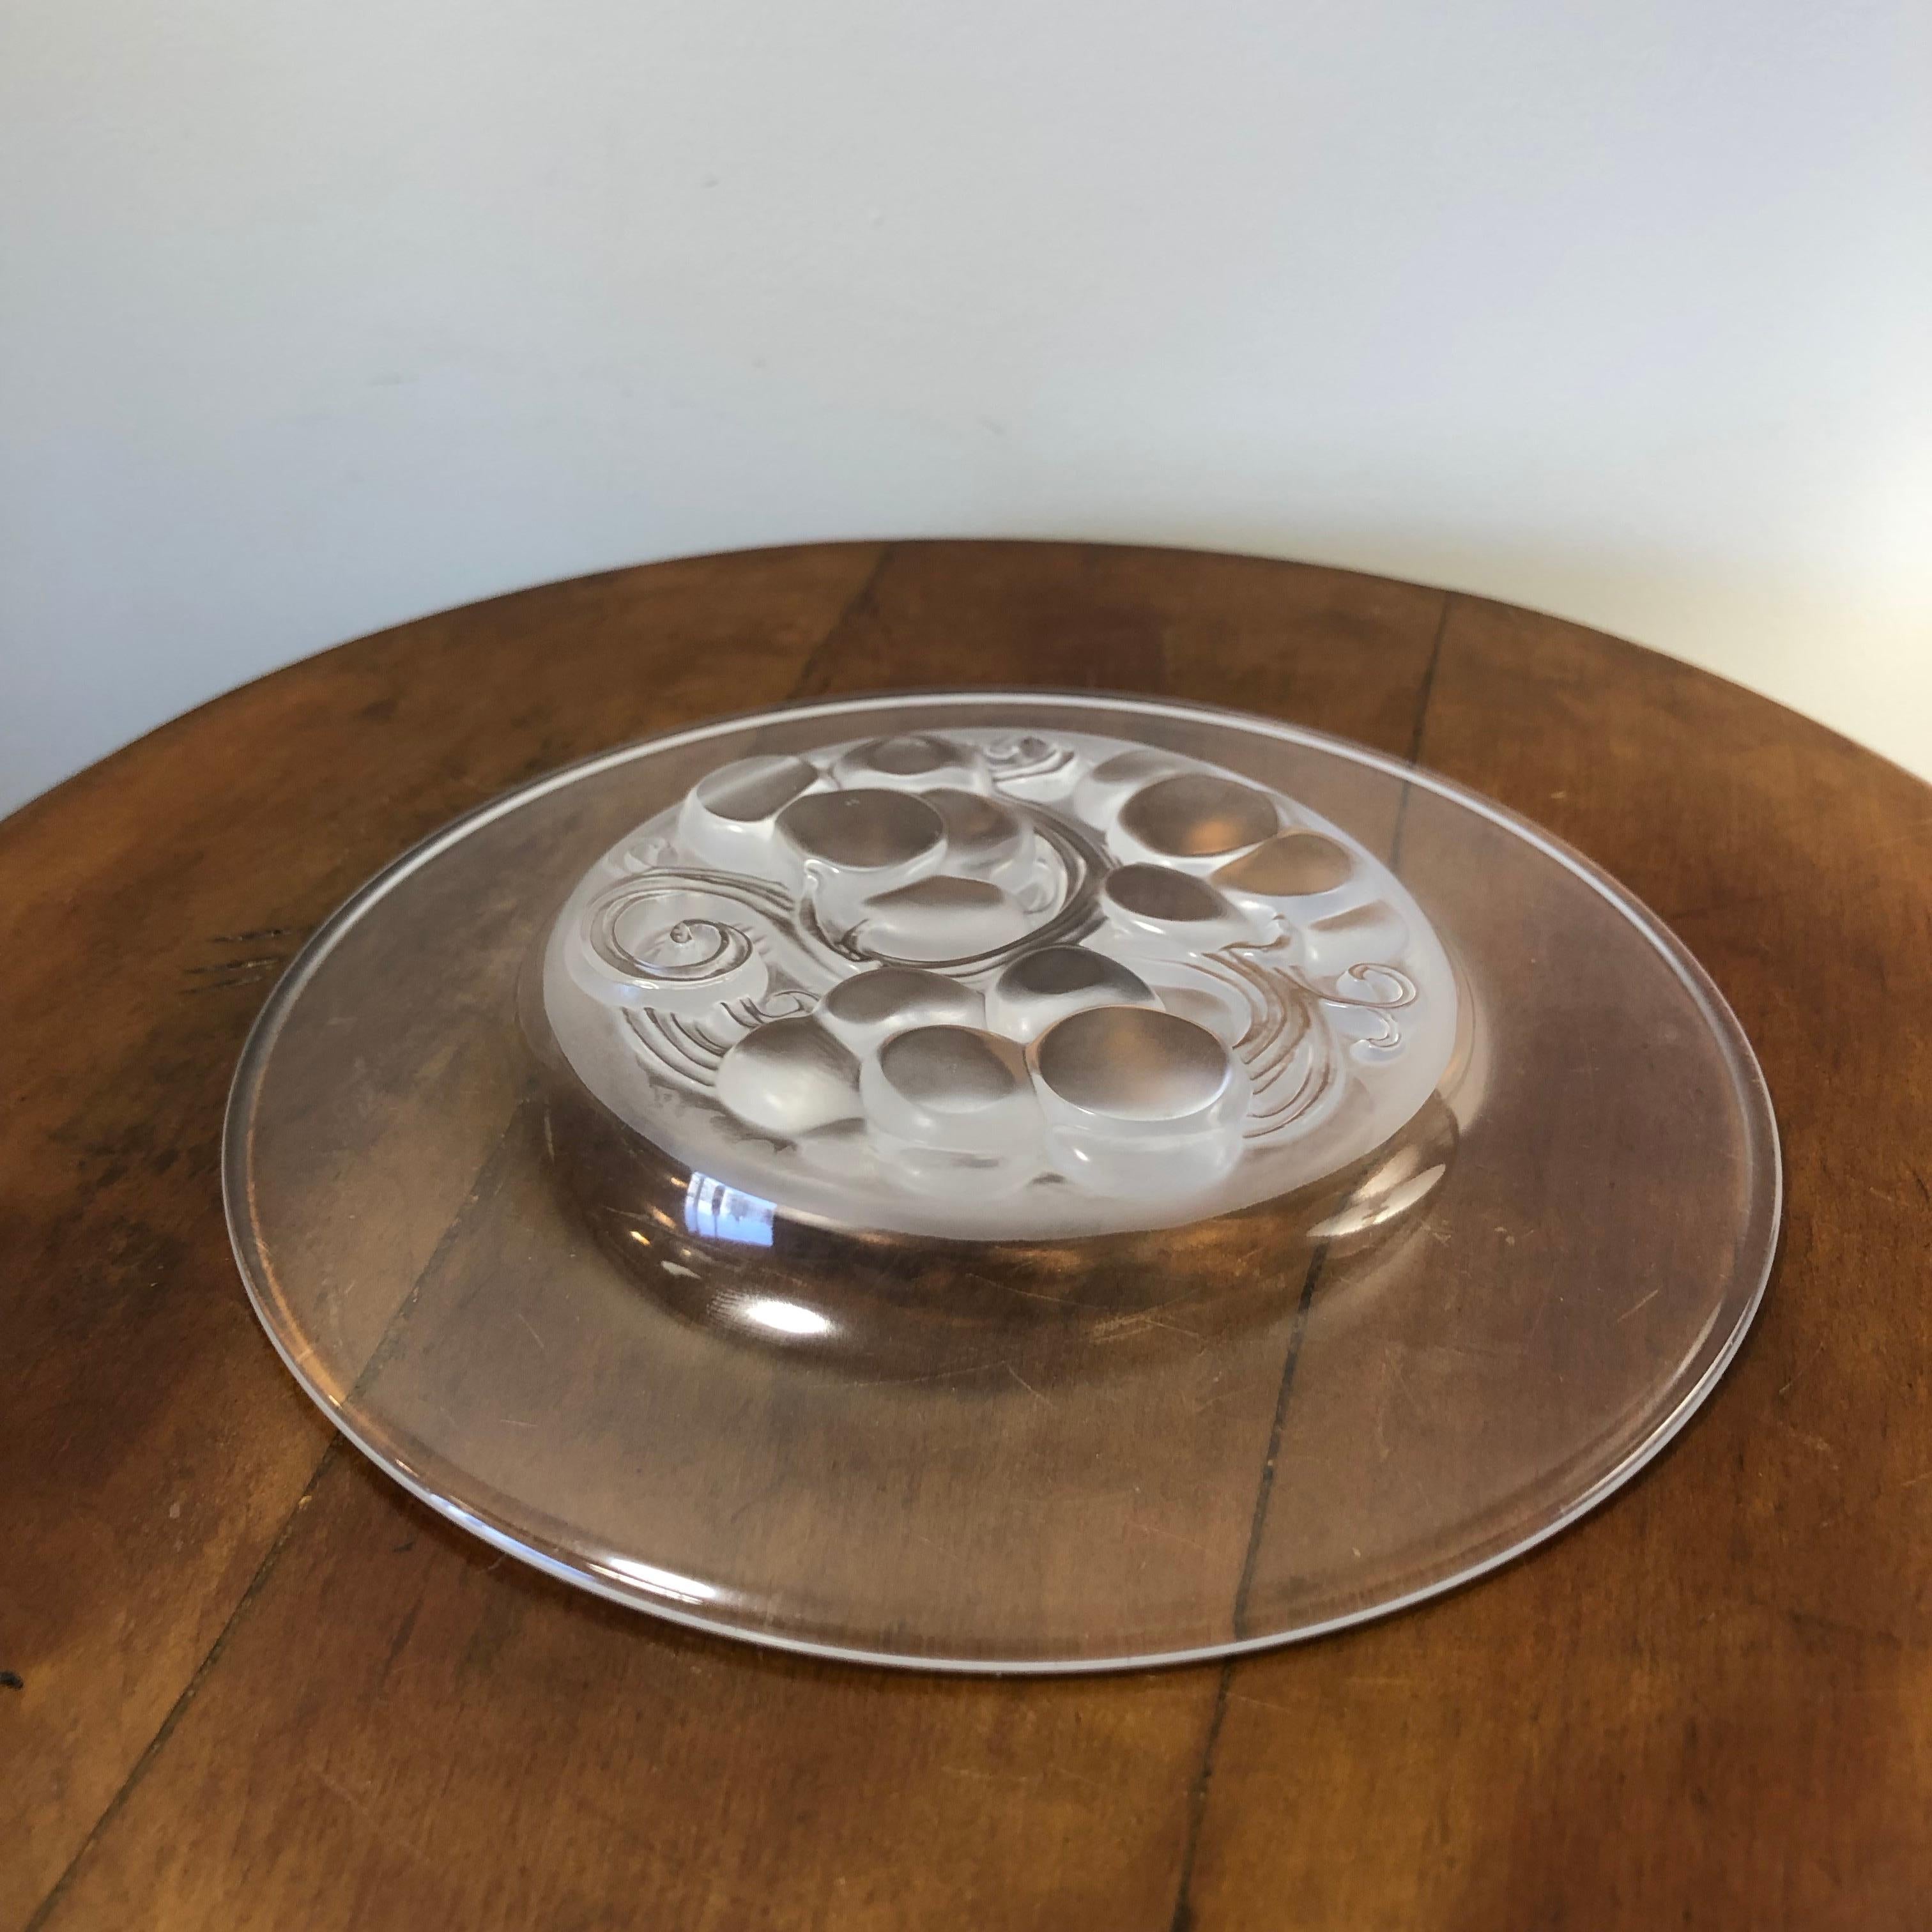 European 1932 Rene Lalique Marienthal Model Crystal Lunch Plates Lalique, France Set of 9